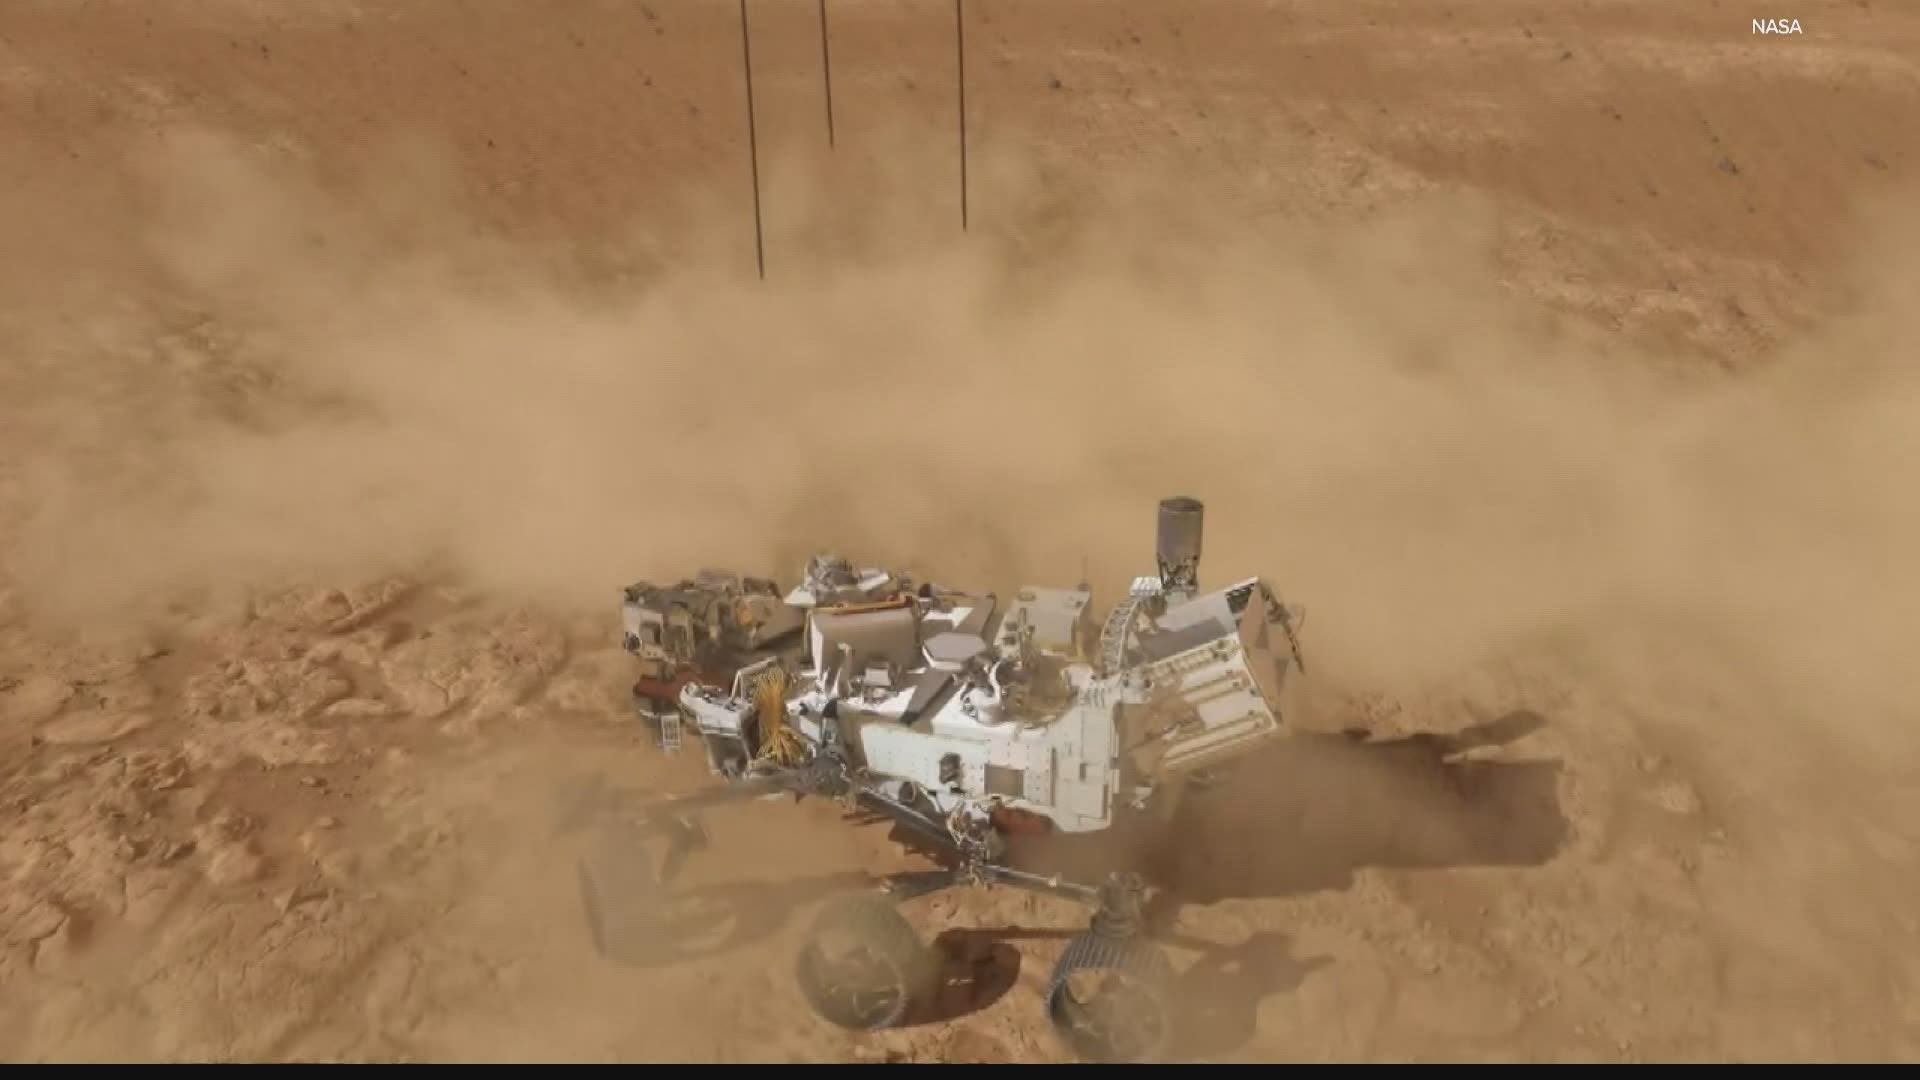 Rich Nye talked to the Purdue professor who is part of the team of scientists looking for signs of life on Mars.